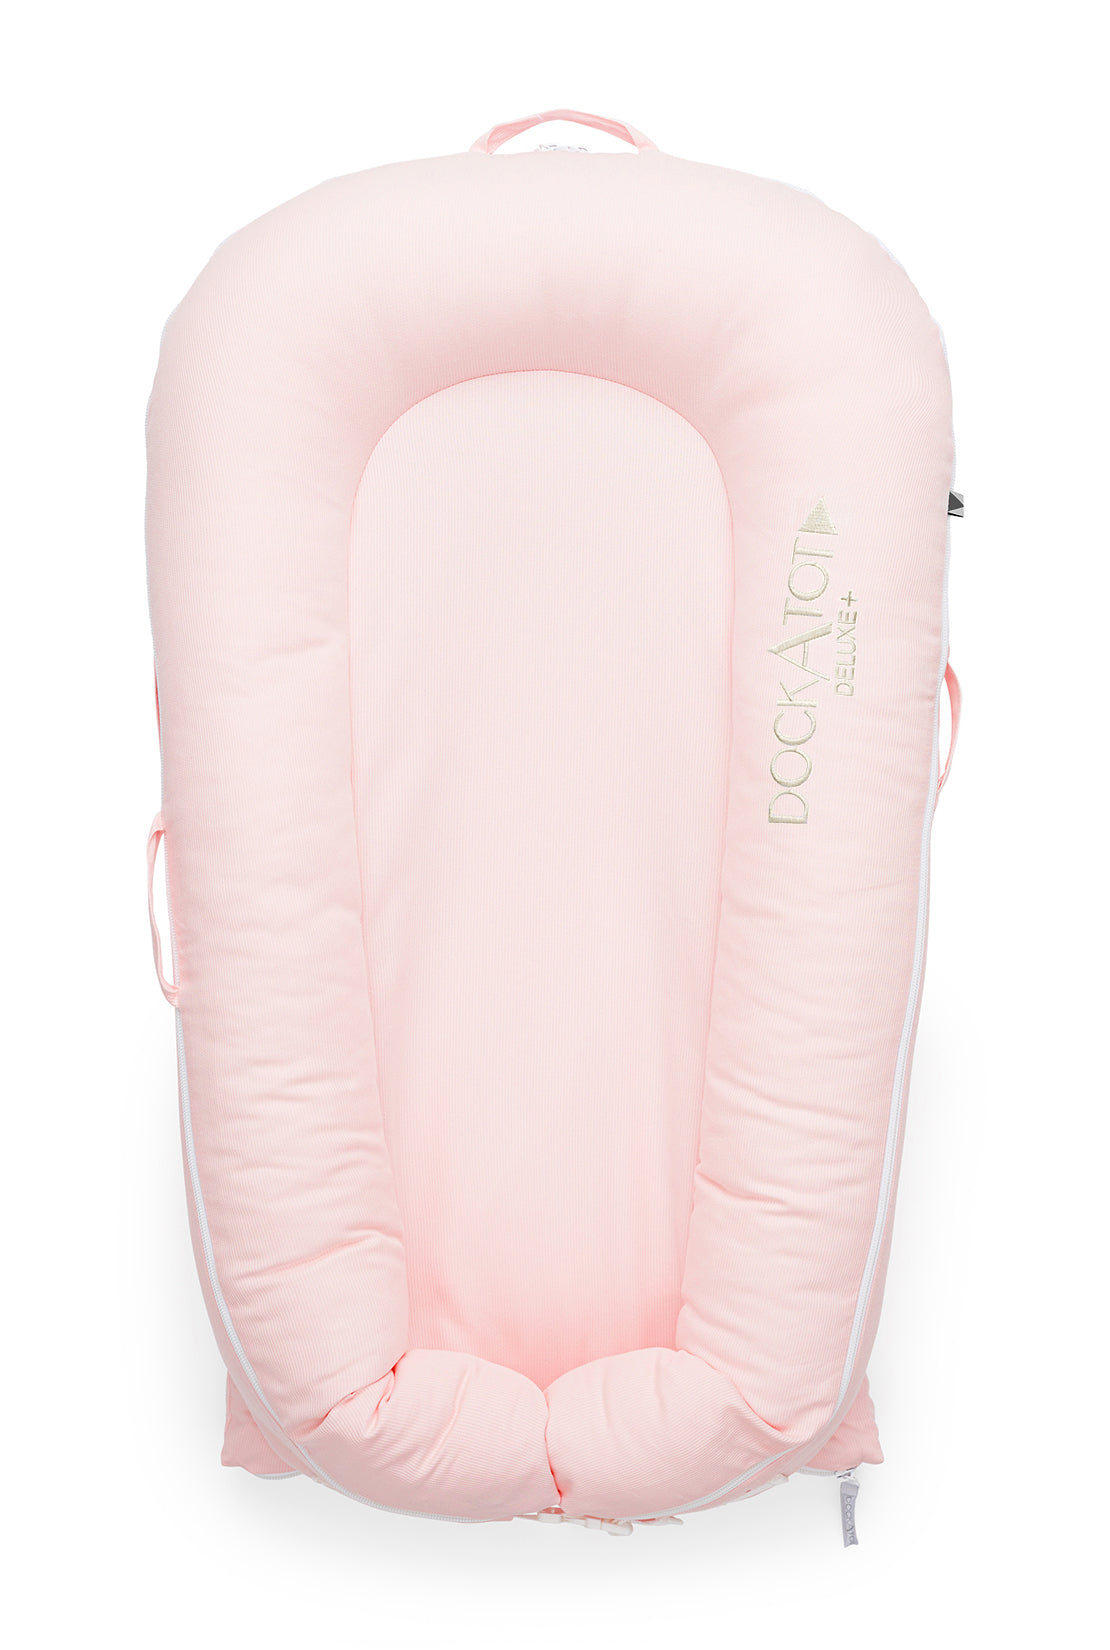 DockATot Deluxe+ Baby Lounger Strawberry Cream - Out of Stock